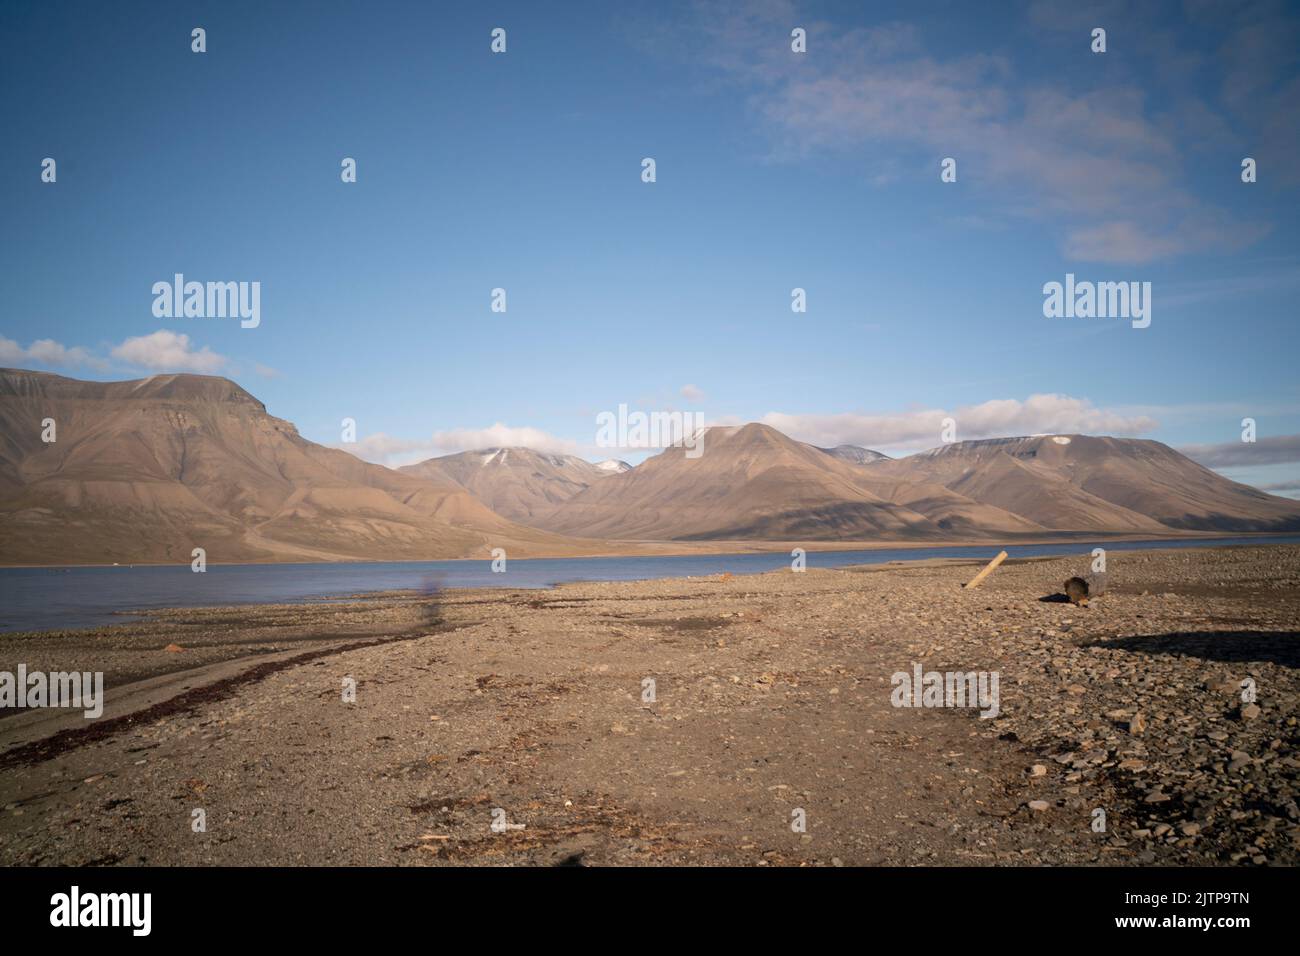 landscape view of the sea in the coast of Svalbard in the arctic ocean Stock Photo